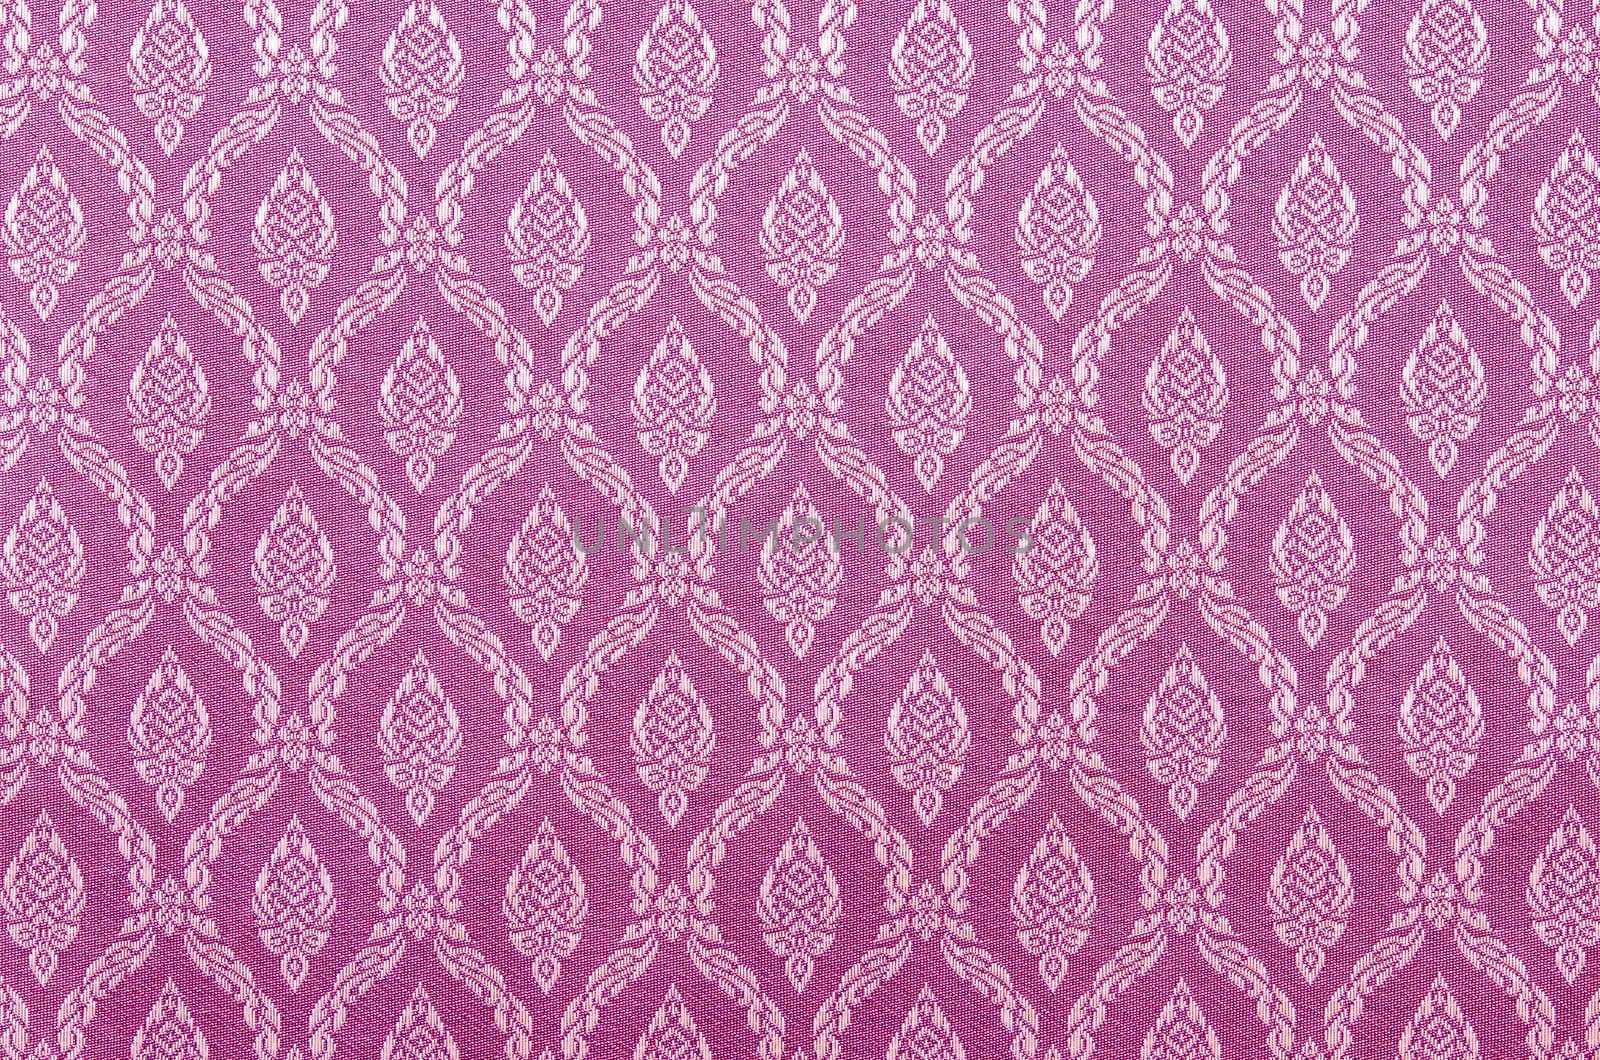 Background of Thai style Pink fabric pattern